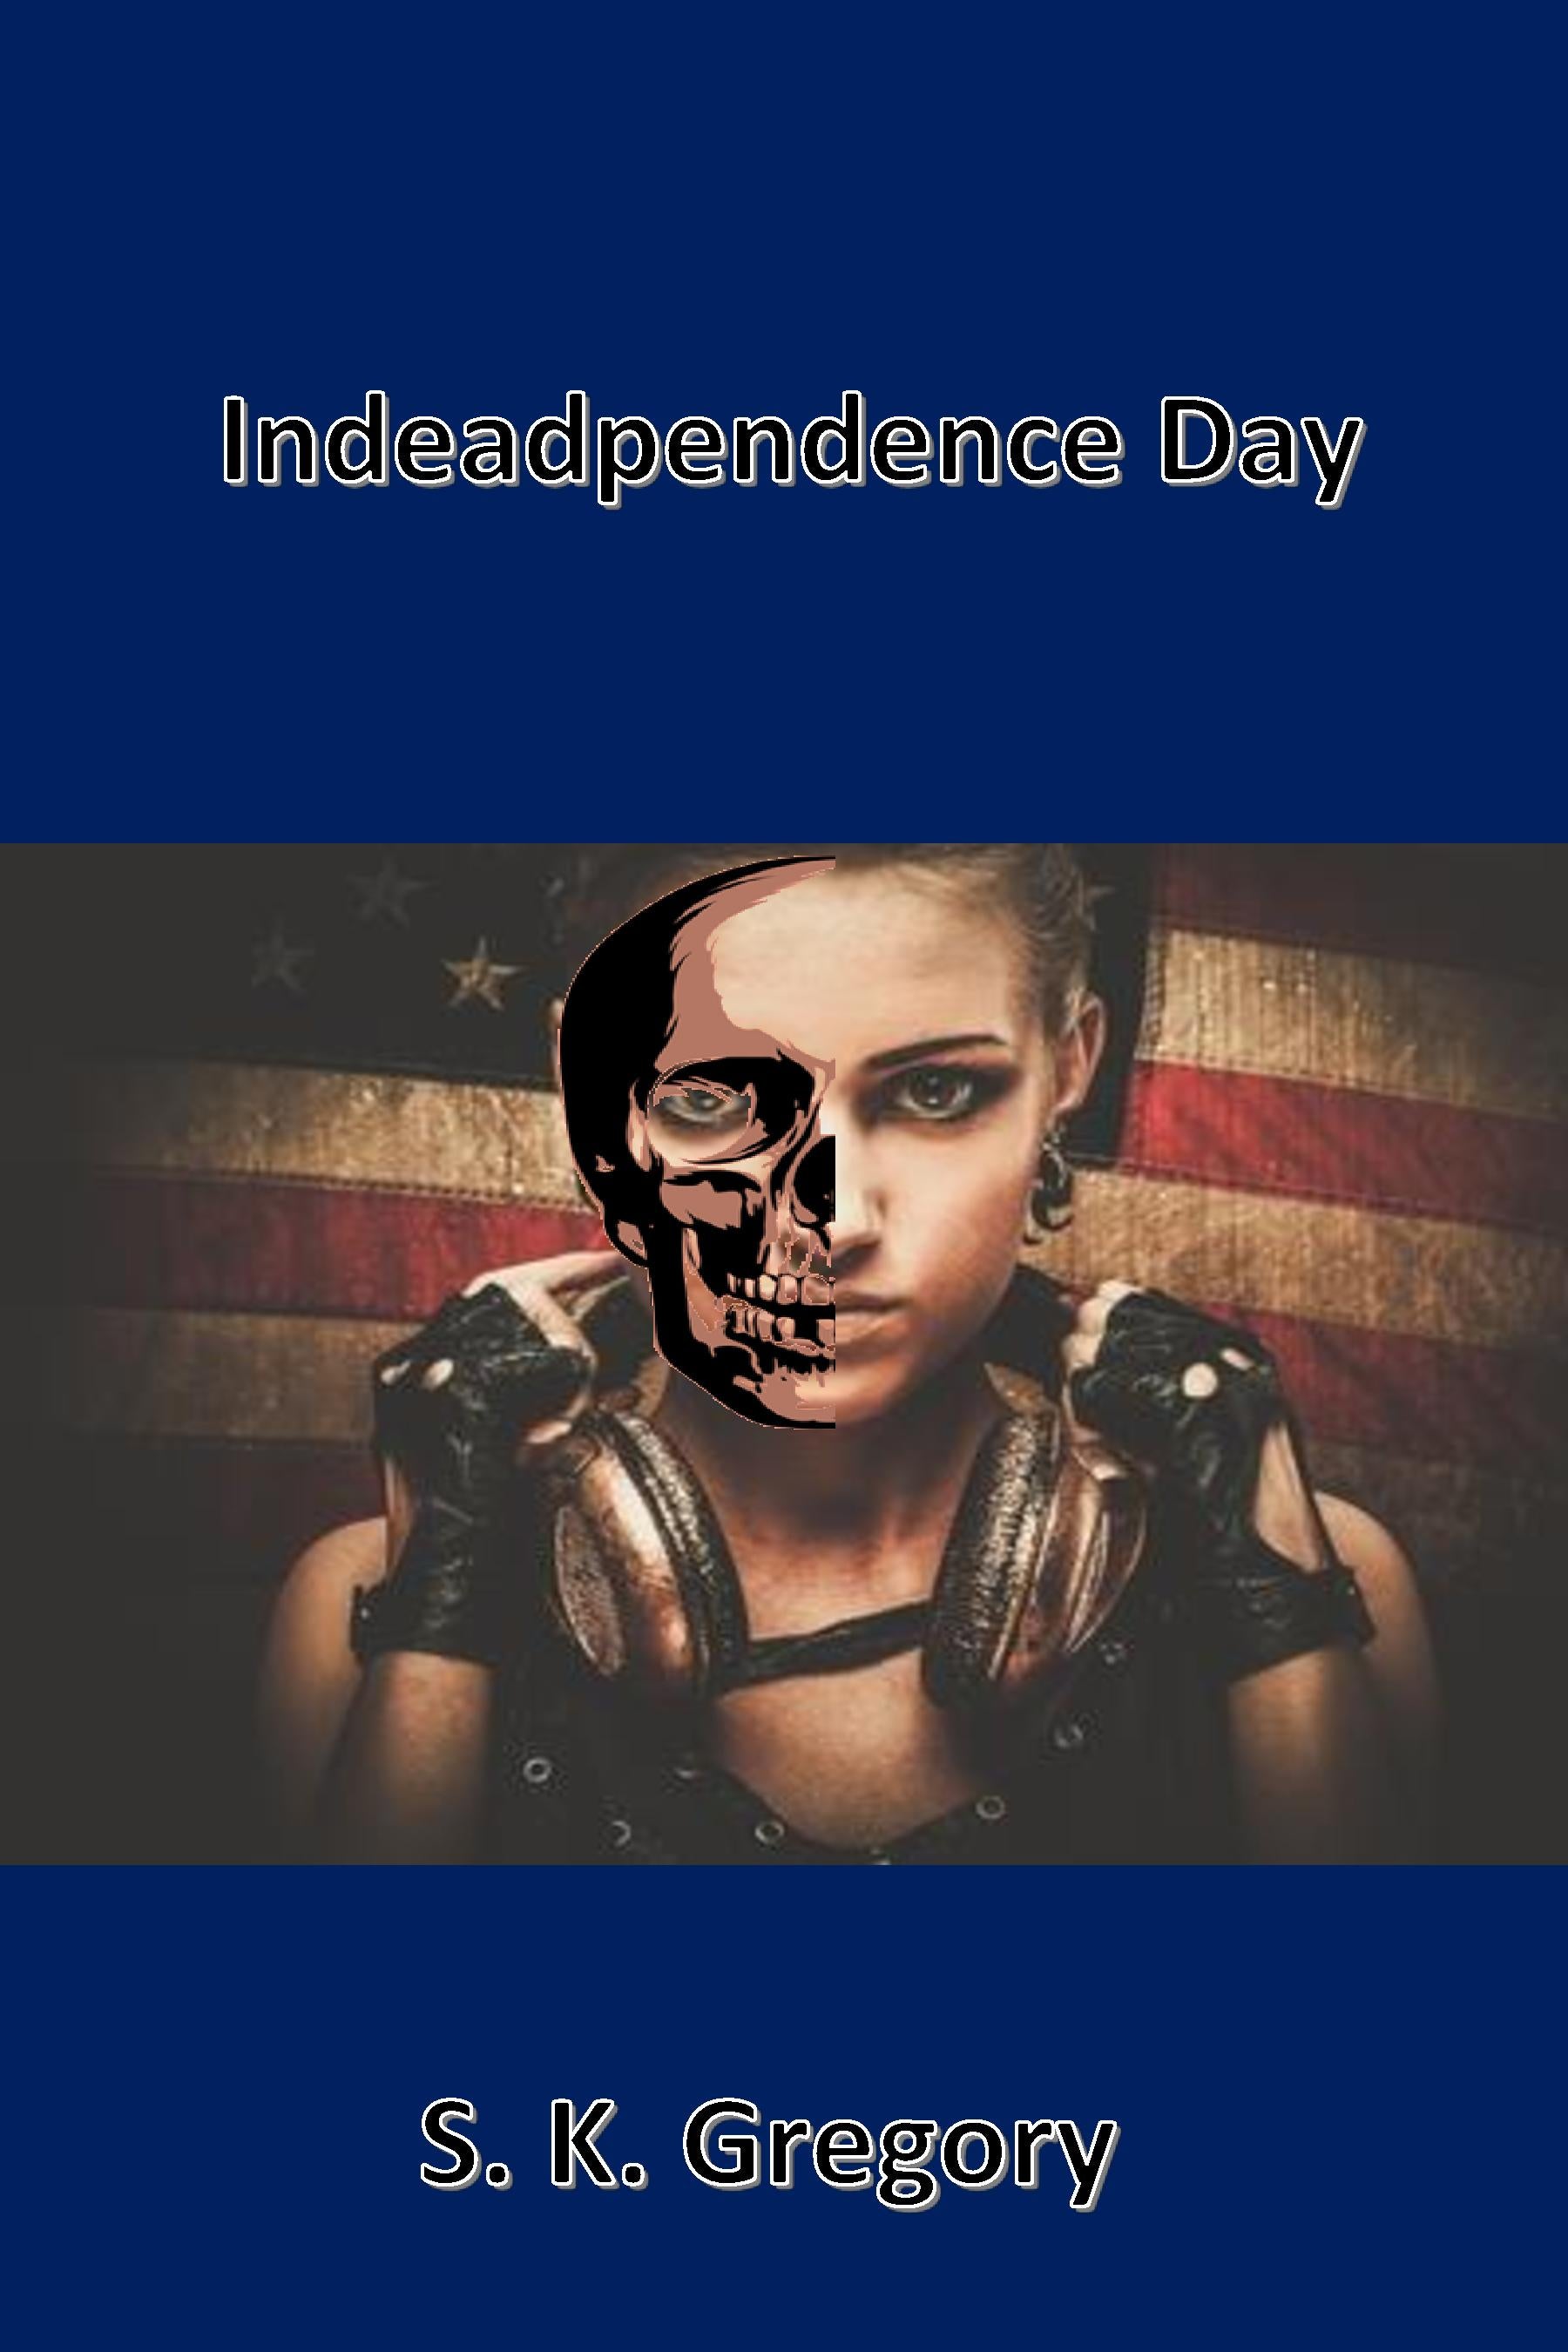 Book Review: Indeadpendence Day by Samantha Gregory